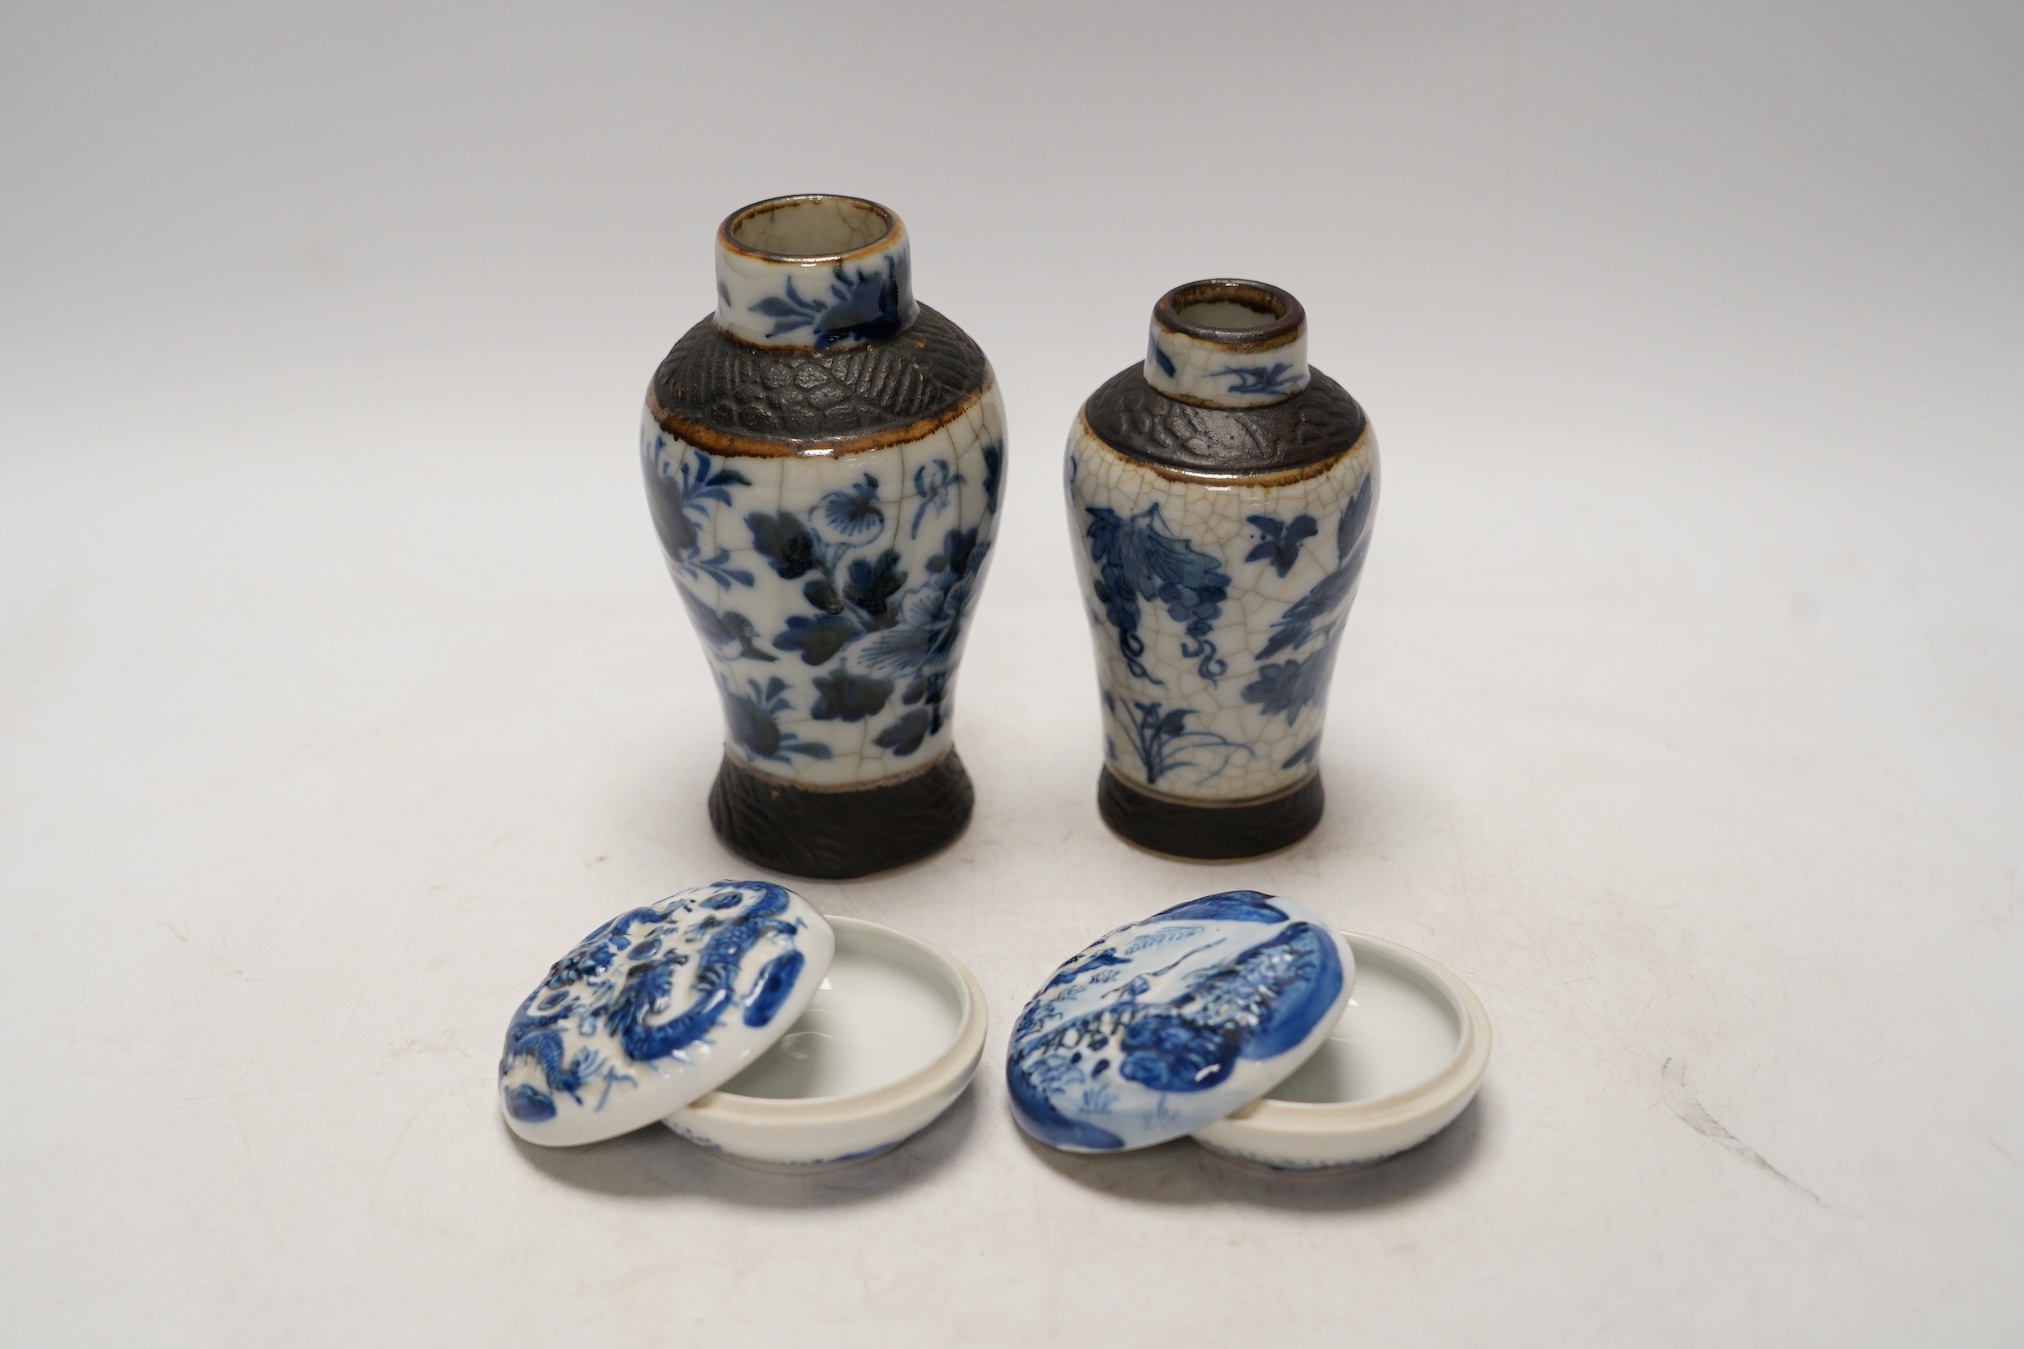 Chinese blue and white ceramics comprising crackle glaze vases and circular seal pots (4). Condition - fair to good, a few minor chips